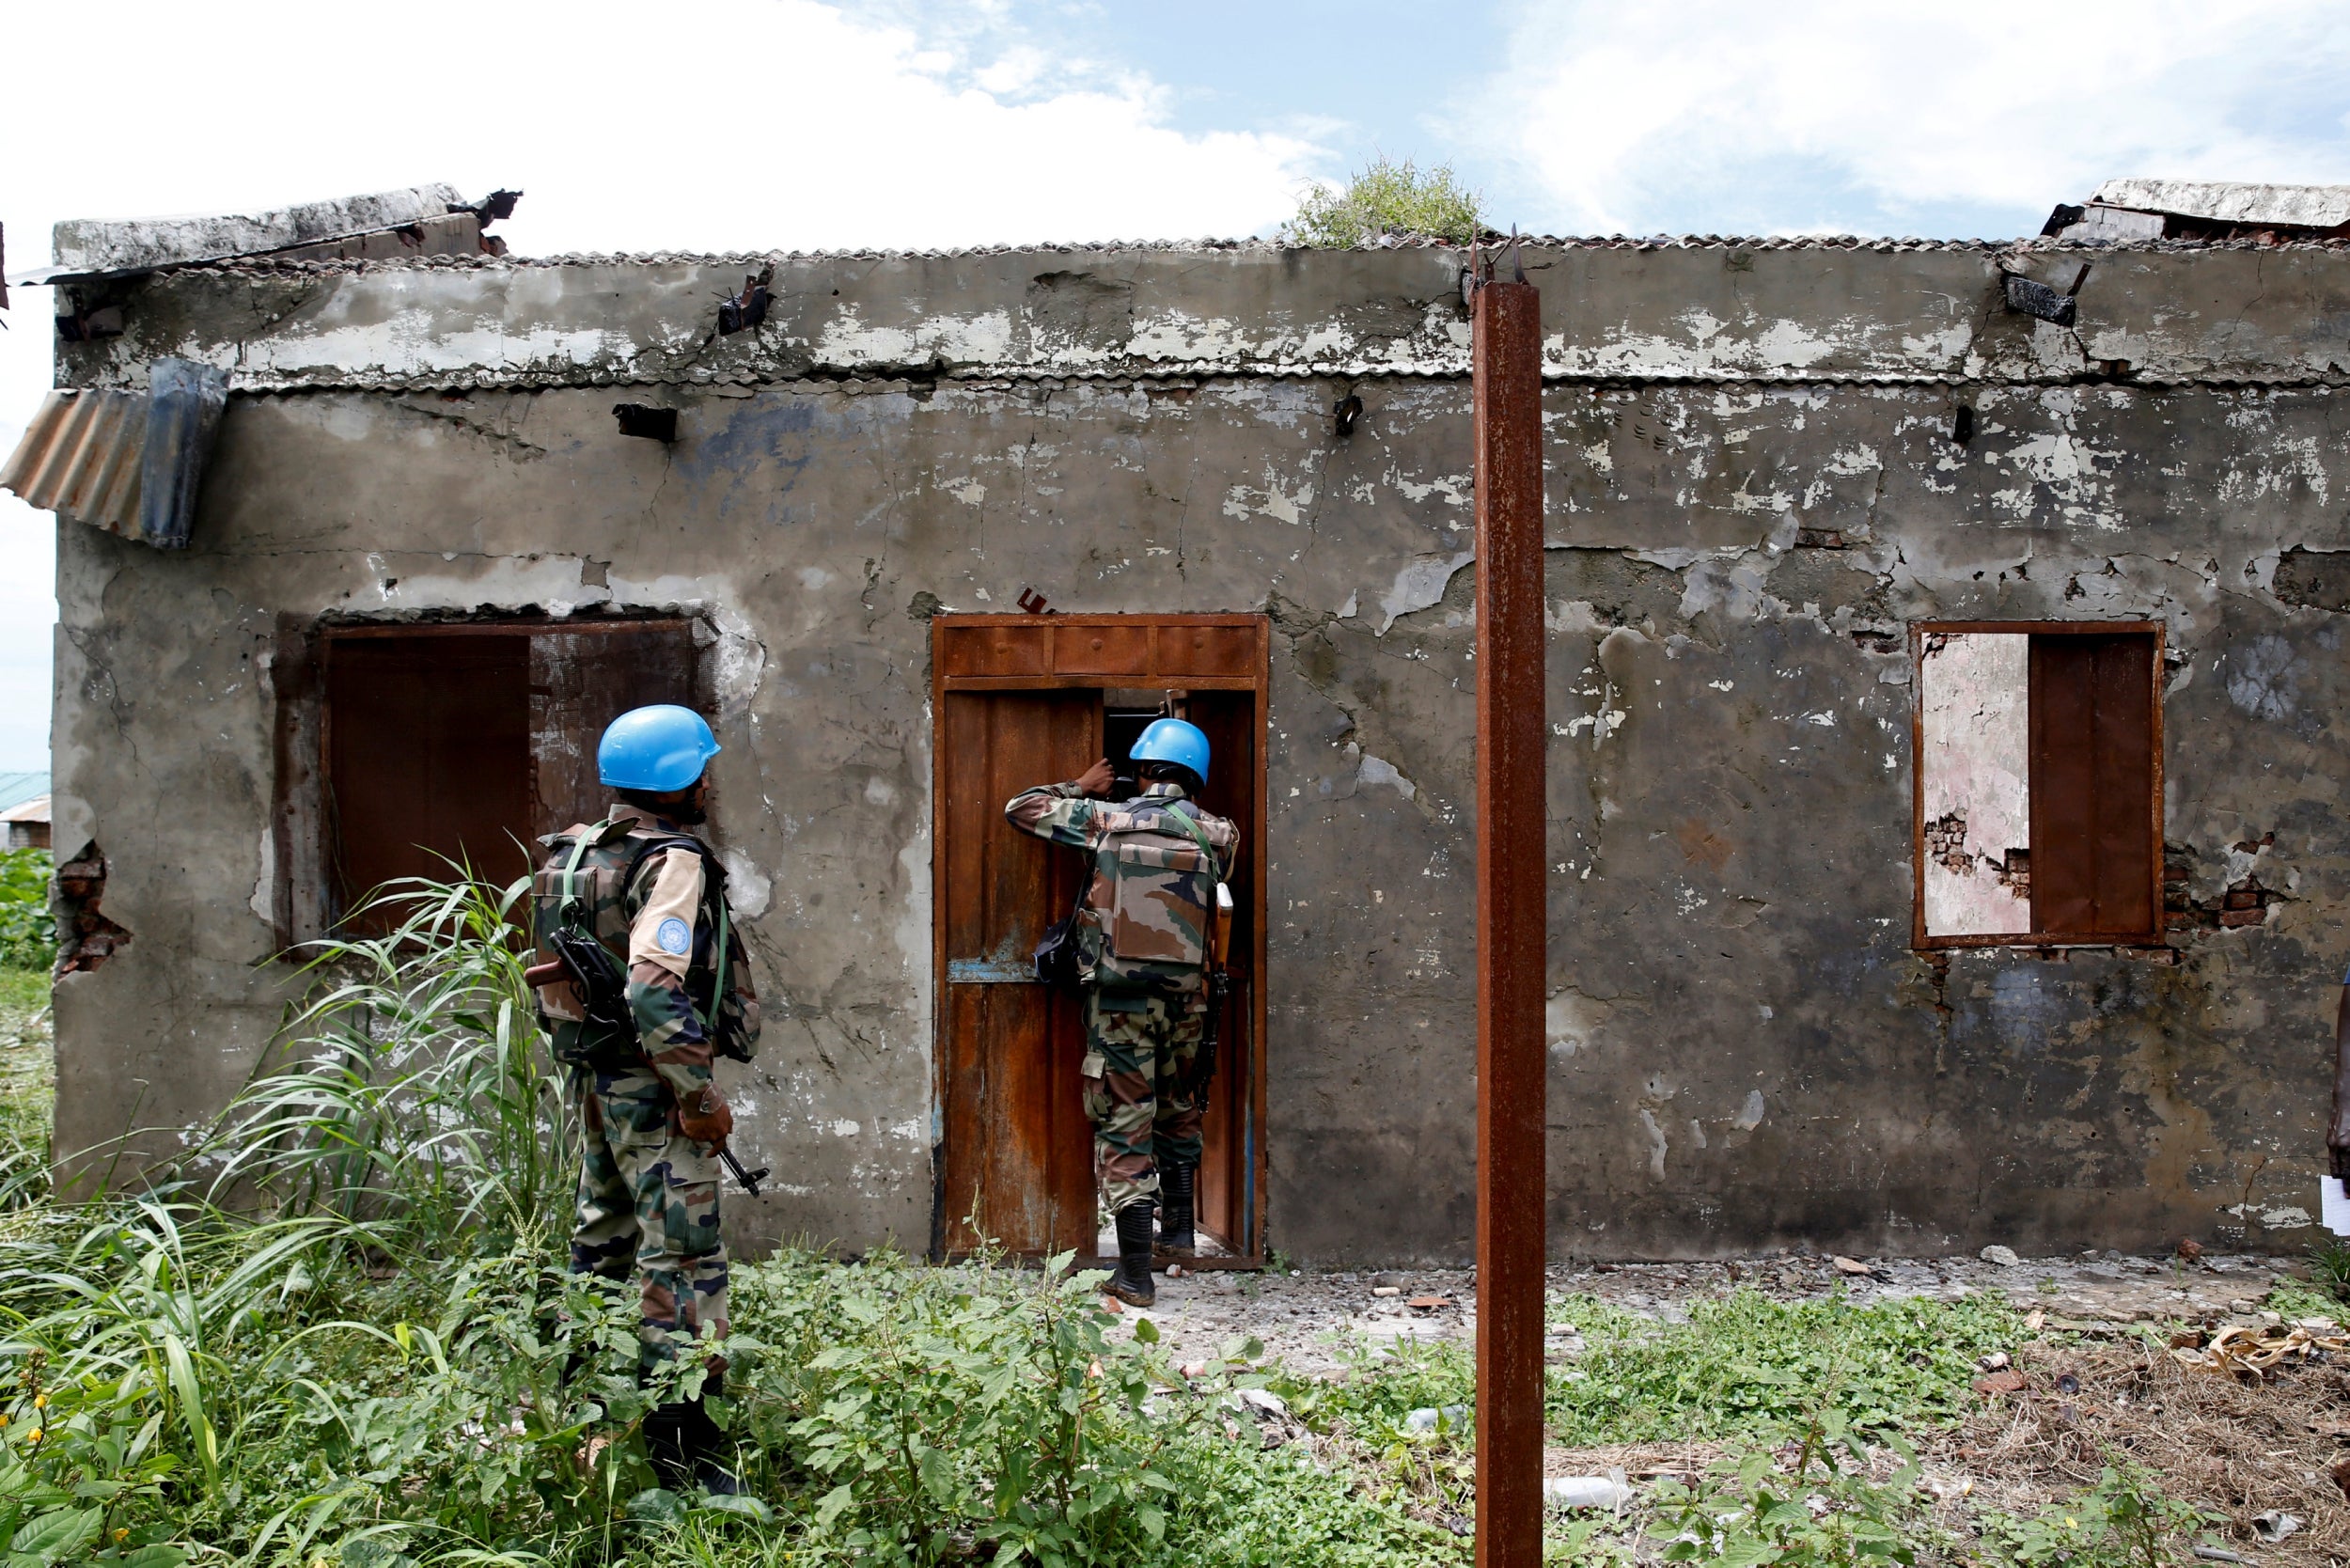 File photo: Indian army peacekeepers with UNMISS (UN Mission in South Sudan) look inside a health clinic destroyed by fighting in the village of Wau Shilluk on the white Nile near the town of Malakal, in the Upper Nile state of South Sudan in 8 September 2018